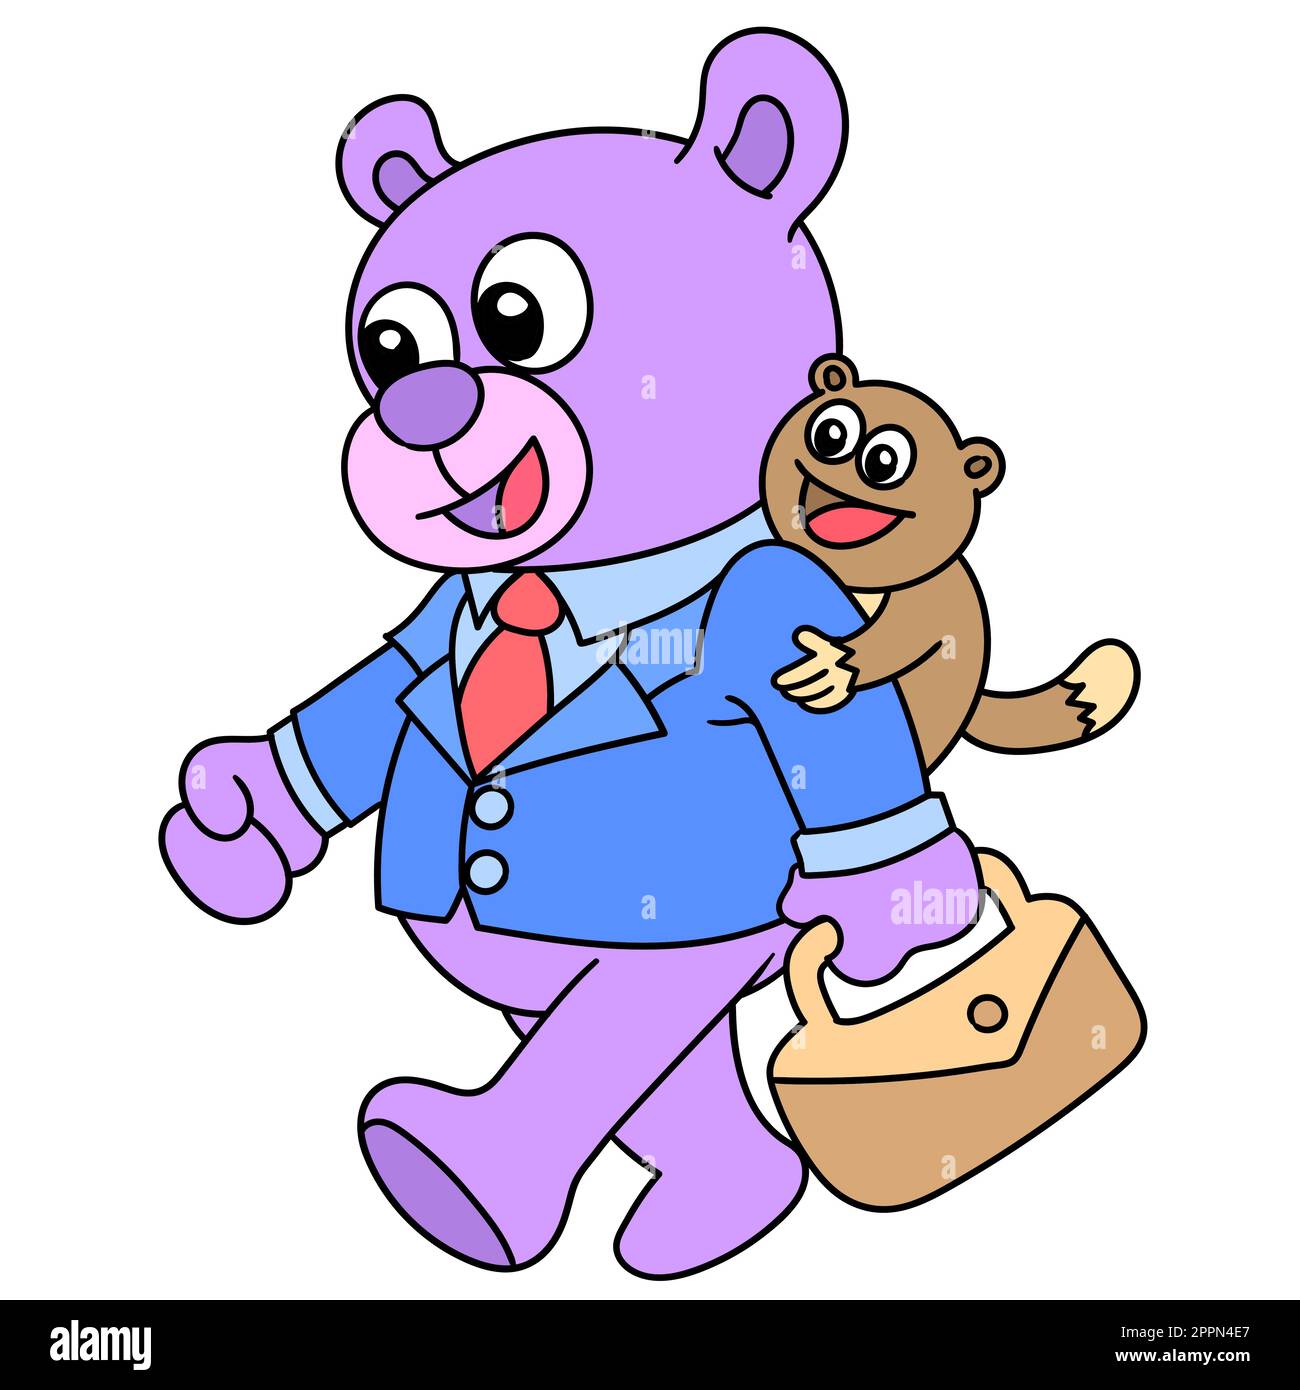 Mr. Bear went to the office wearing a neat suit, doodle icon image Stock Vector